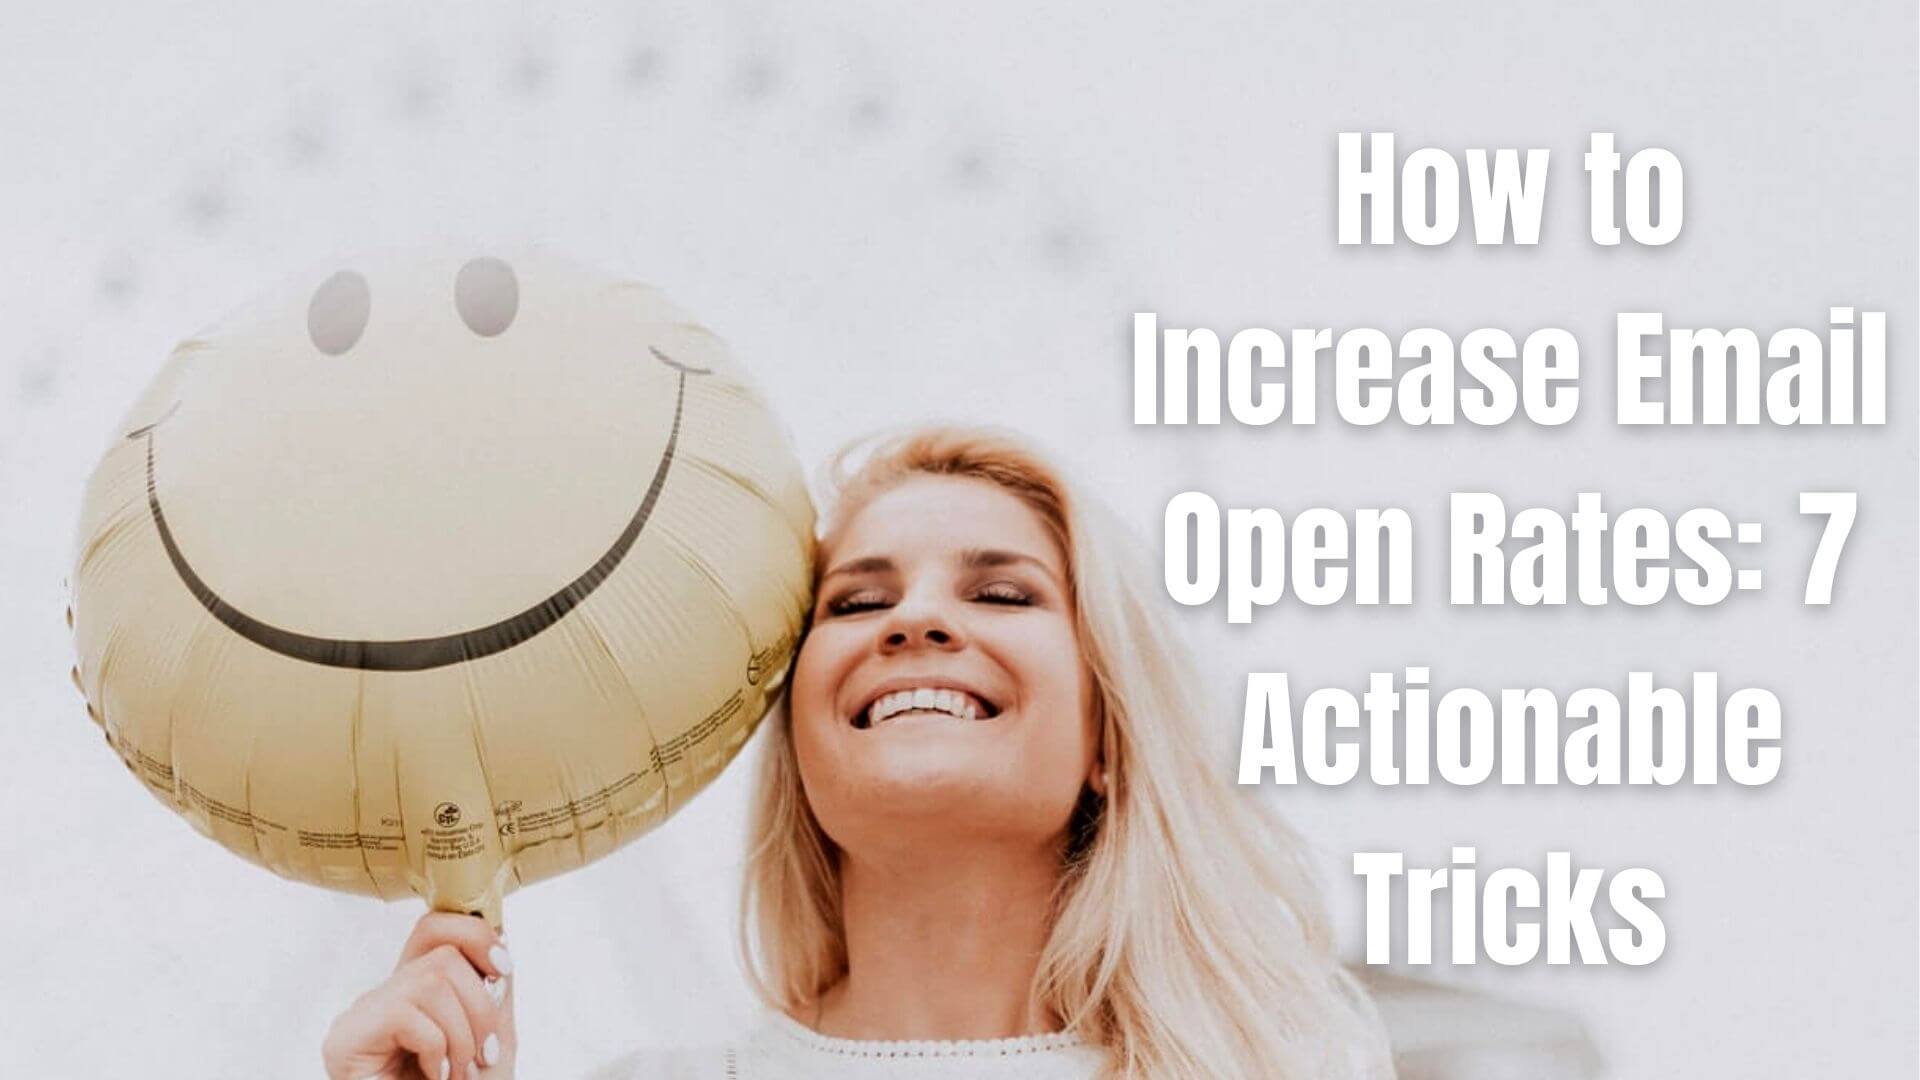 How to Increase Email Open Rates: 7 Actionable Tricks